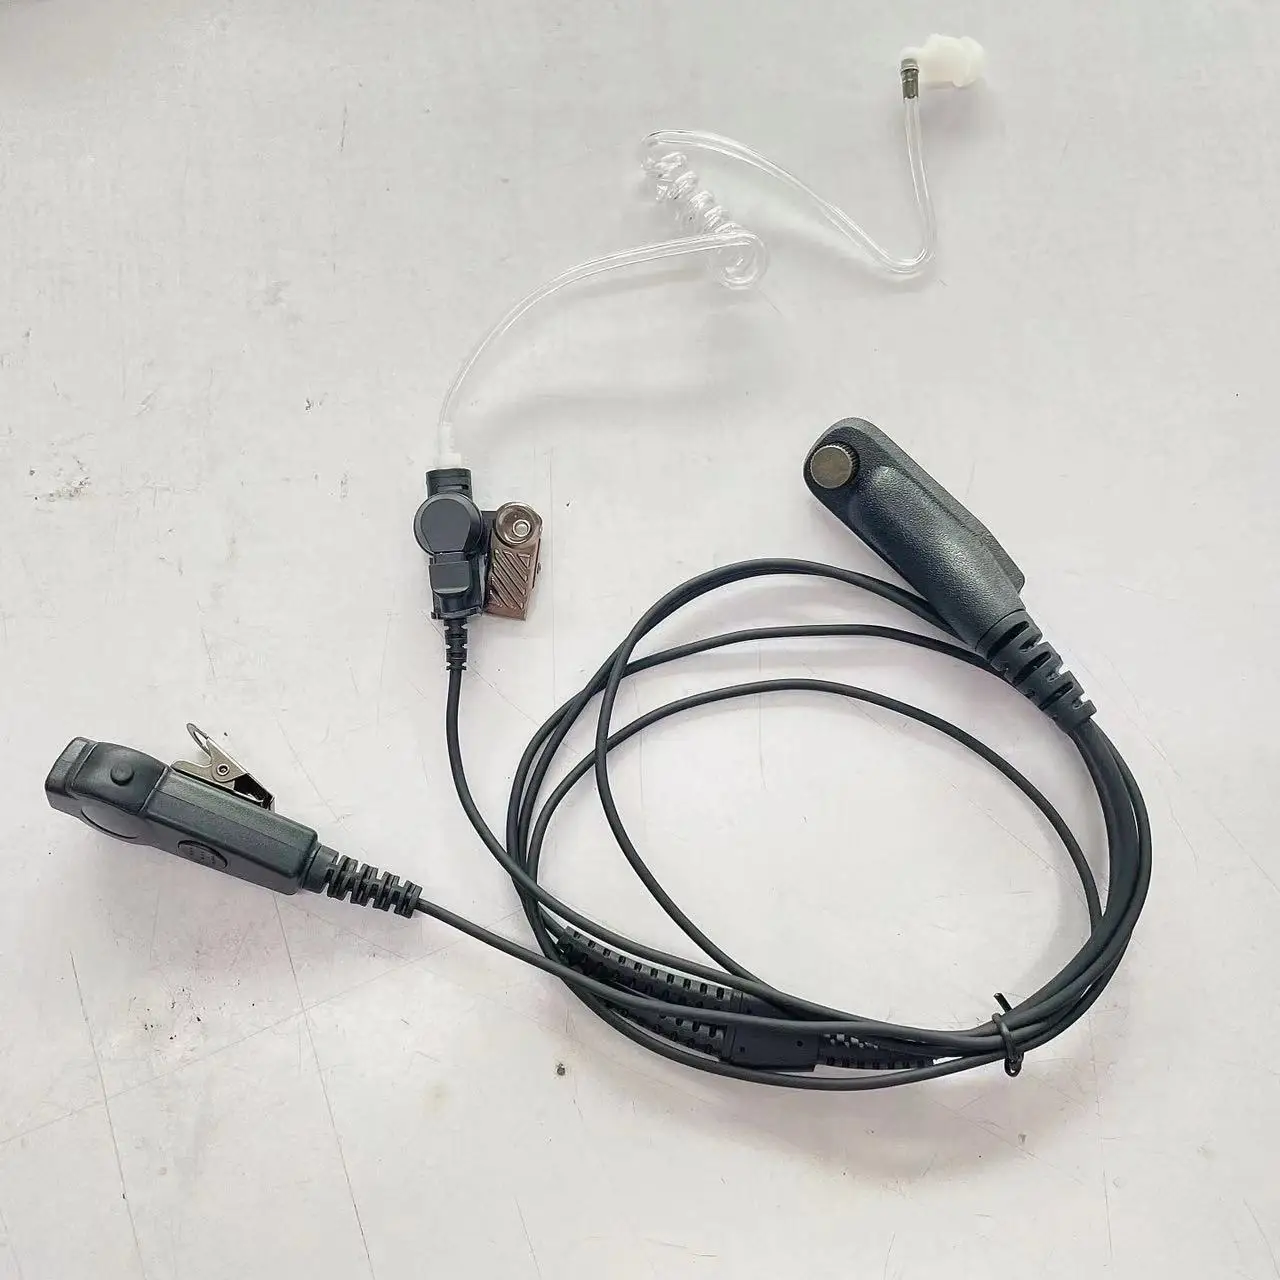 Motorola XPR 7550e Earpiece, G Shape Headset and Mic for Motorola APX4000 APX6000 APX8000 APX900 enlarge